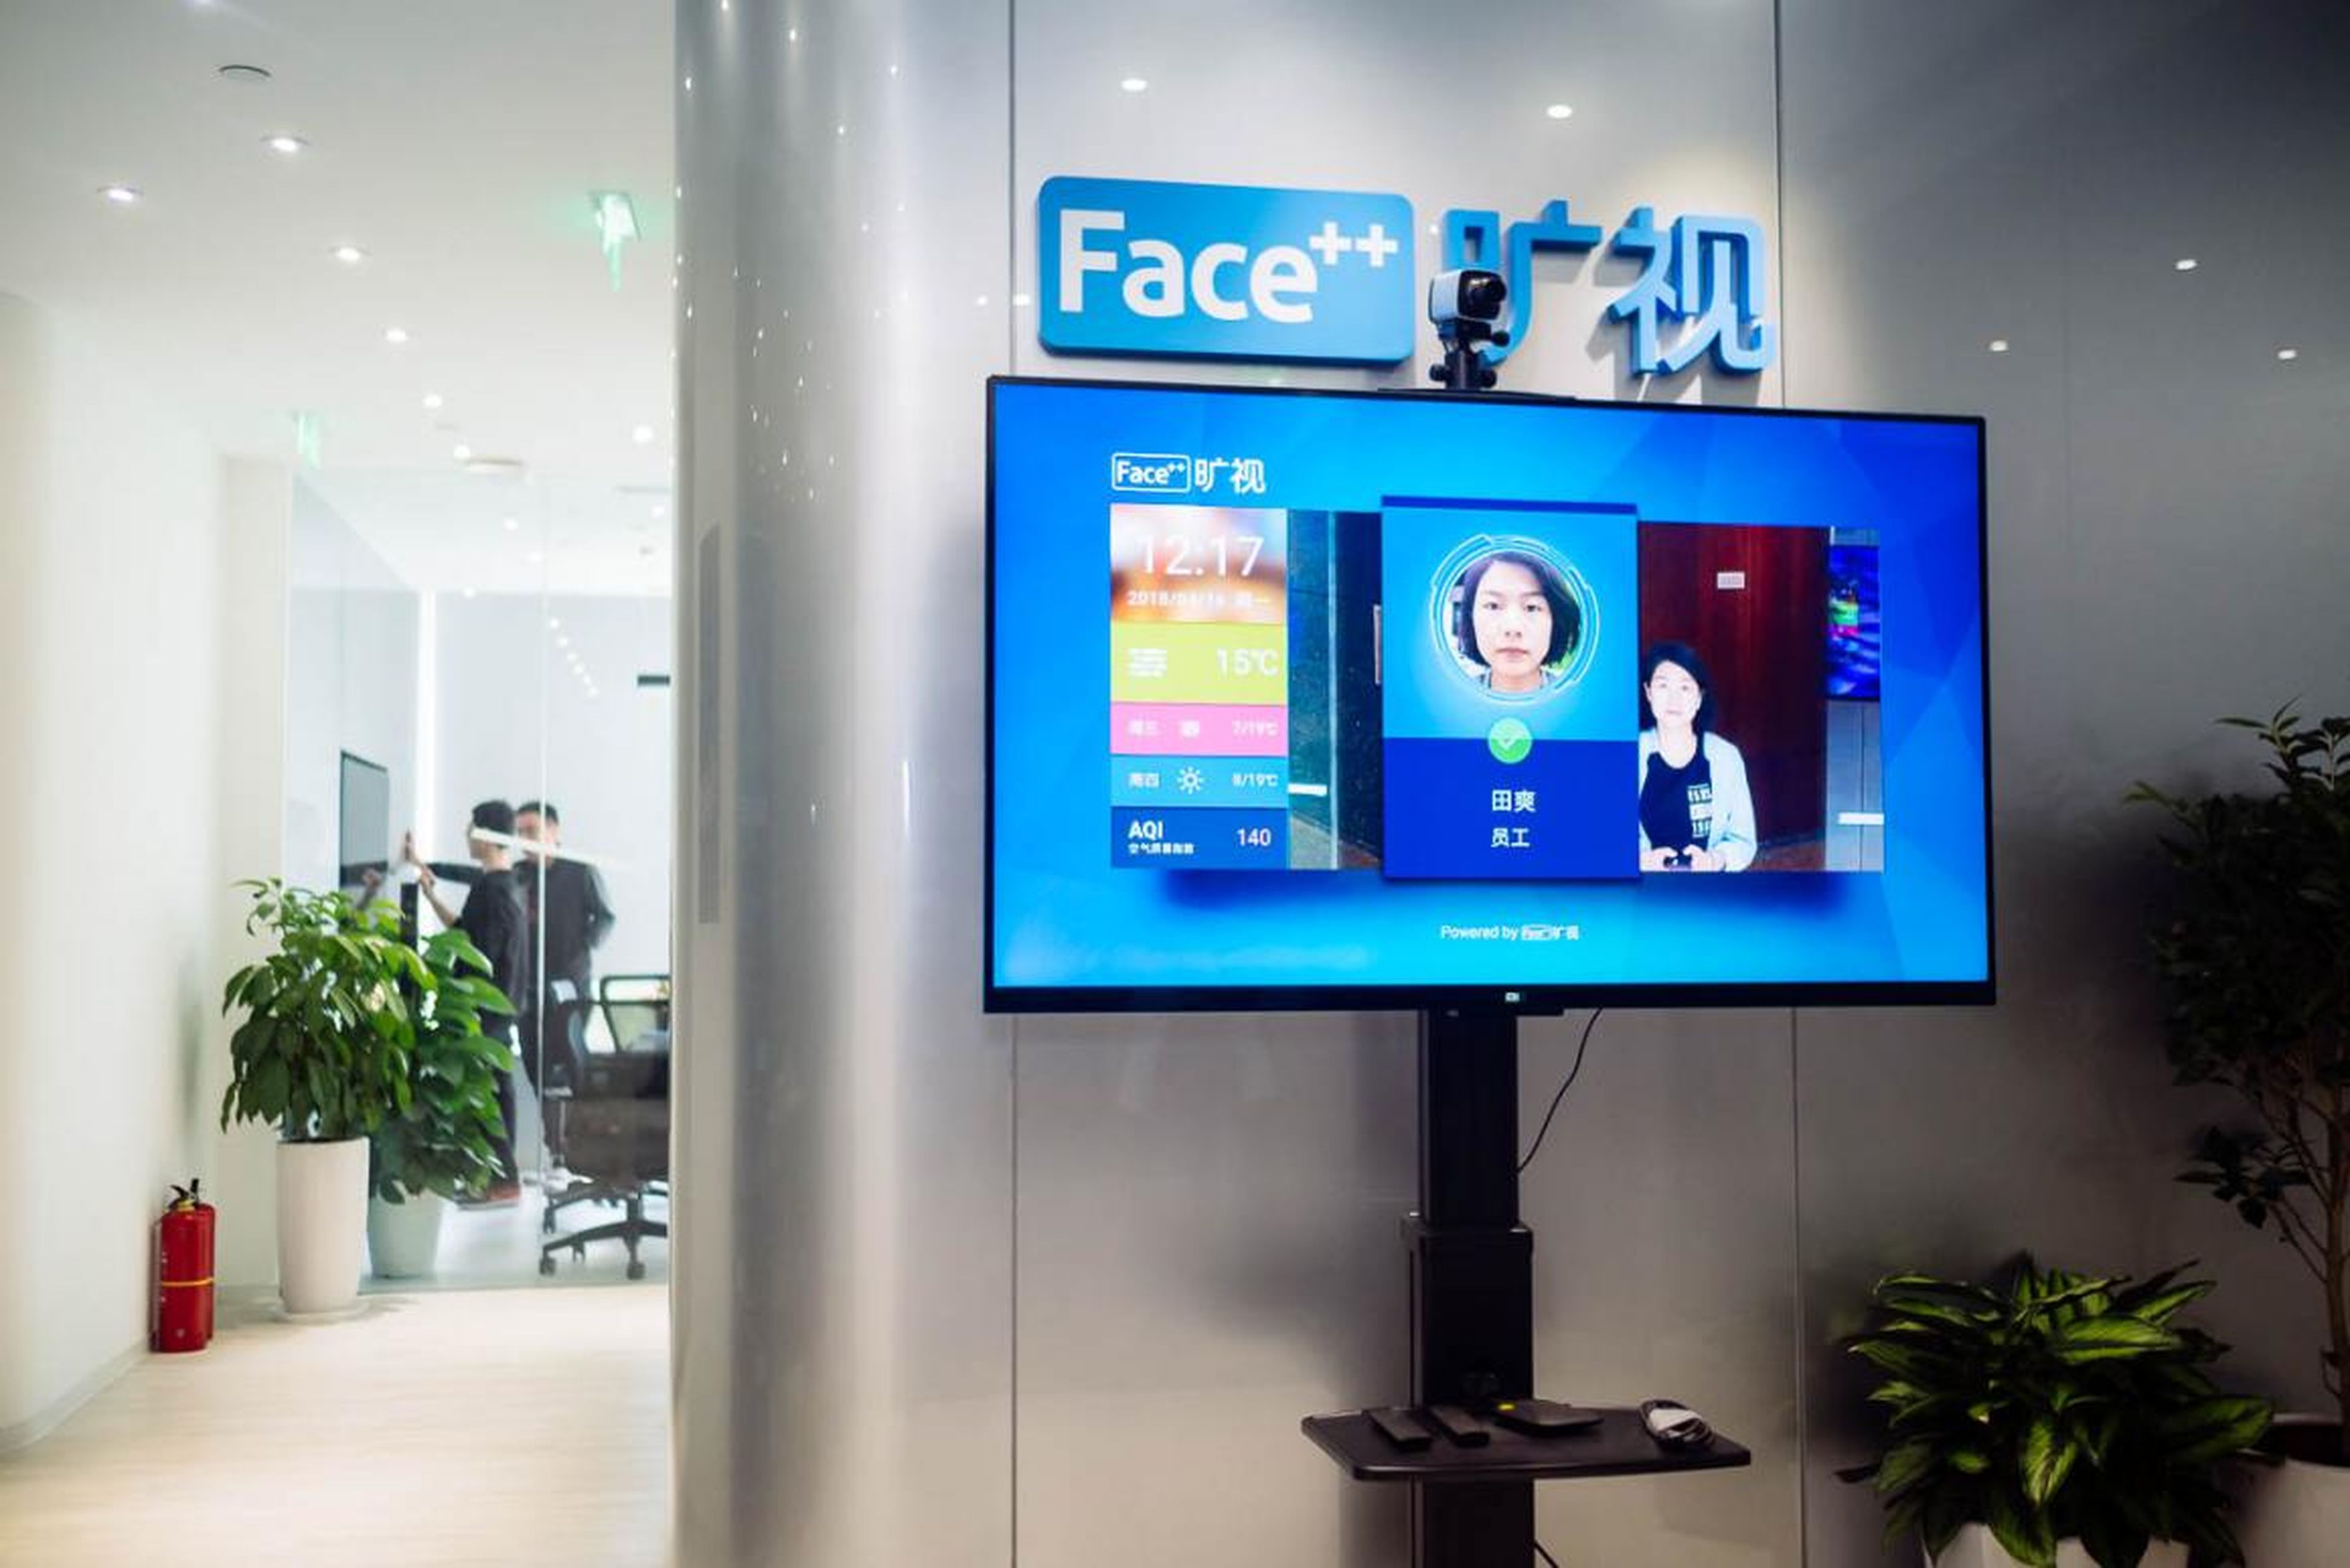 Its main product is Face++, a platform that can detect faces and confirm people's identities with a high degree of accuracy. Entry to all doors in the office is managed by Face++. In order to enter the office, you have to be